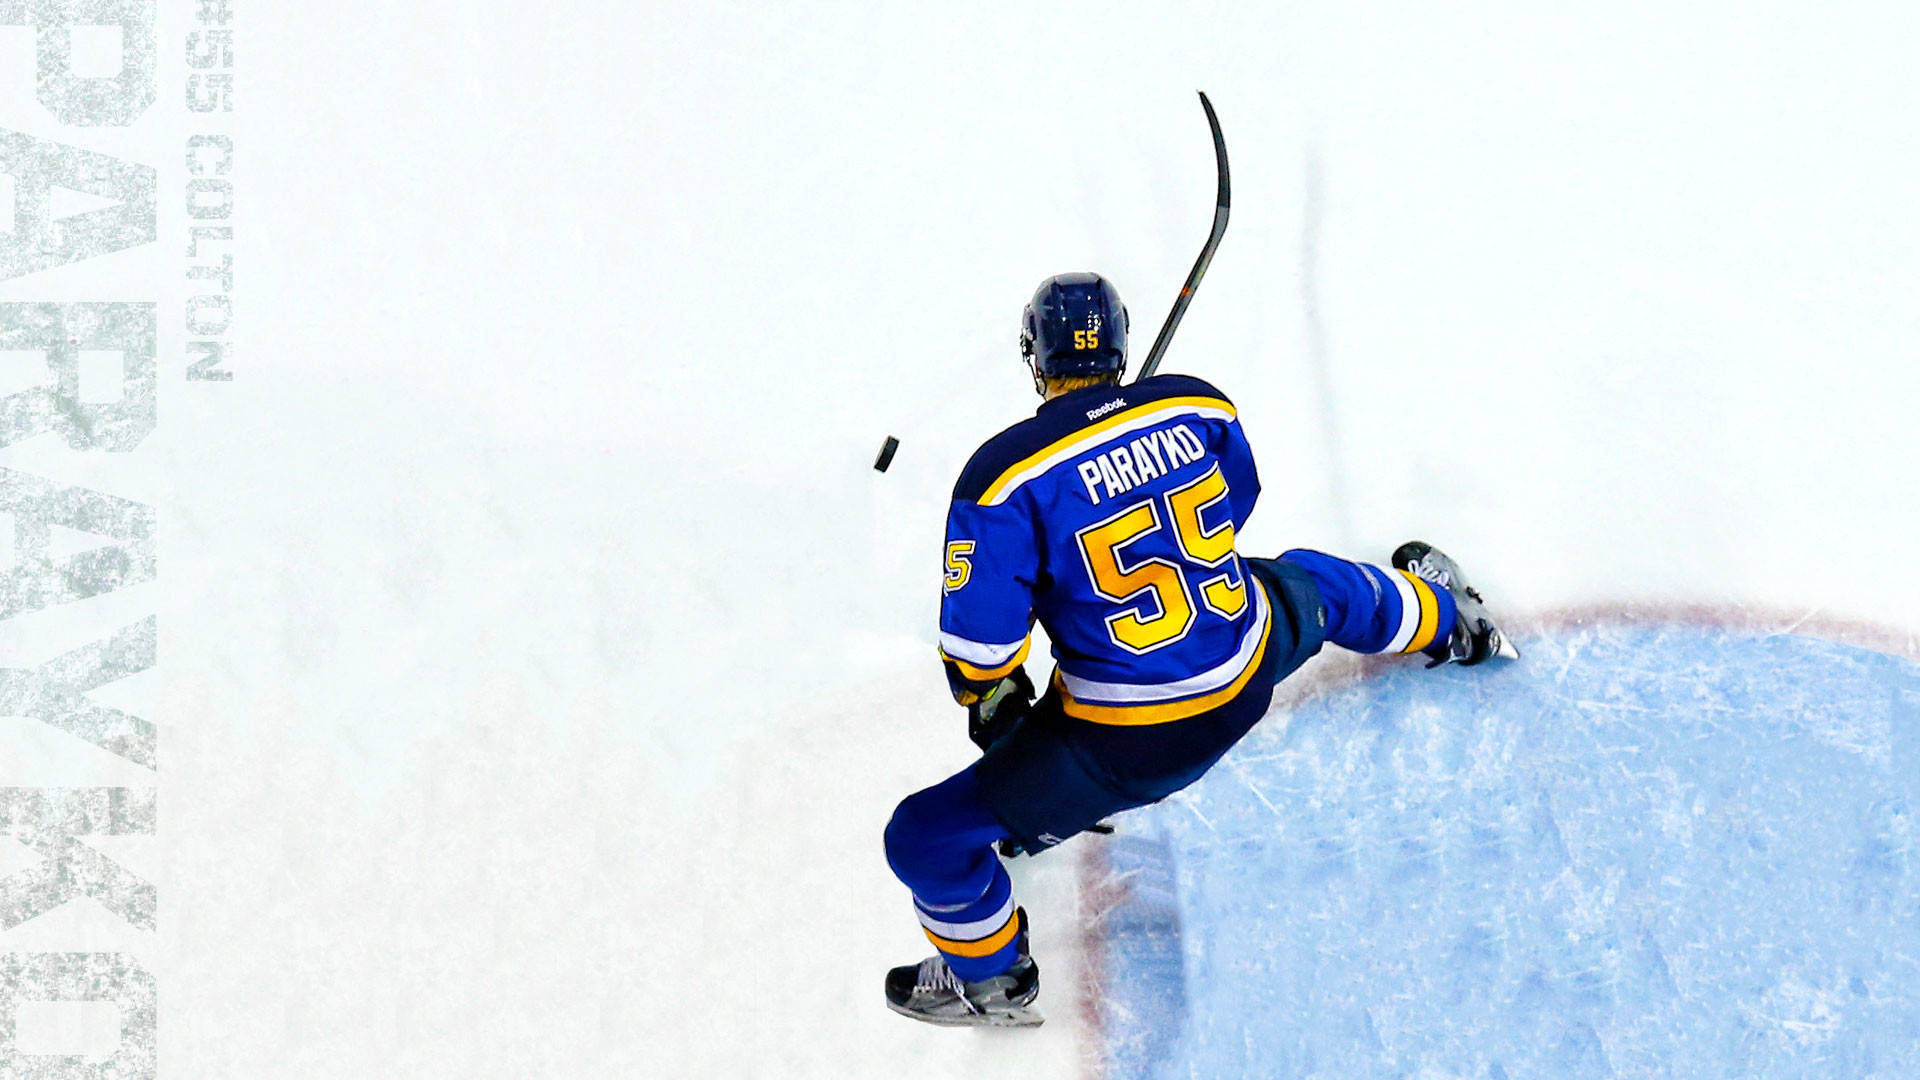 Colton Parayko Powerfully Striking the Puck in a Game Wallpaper